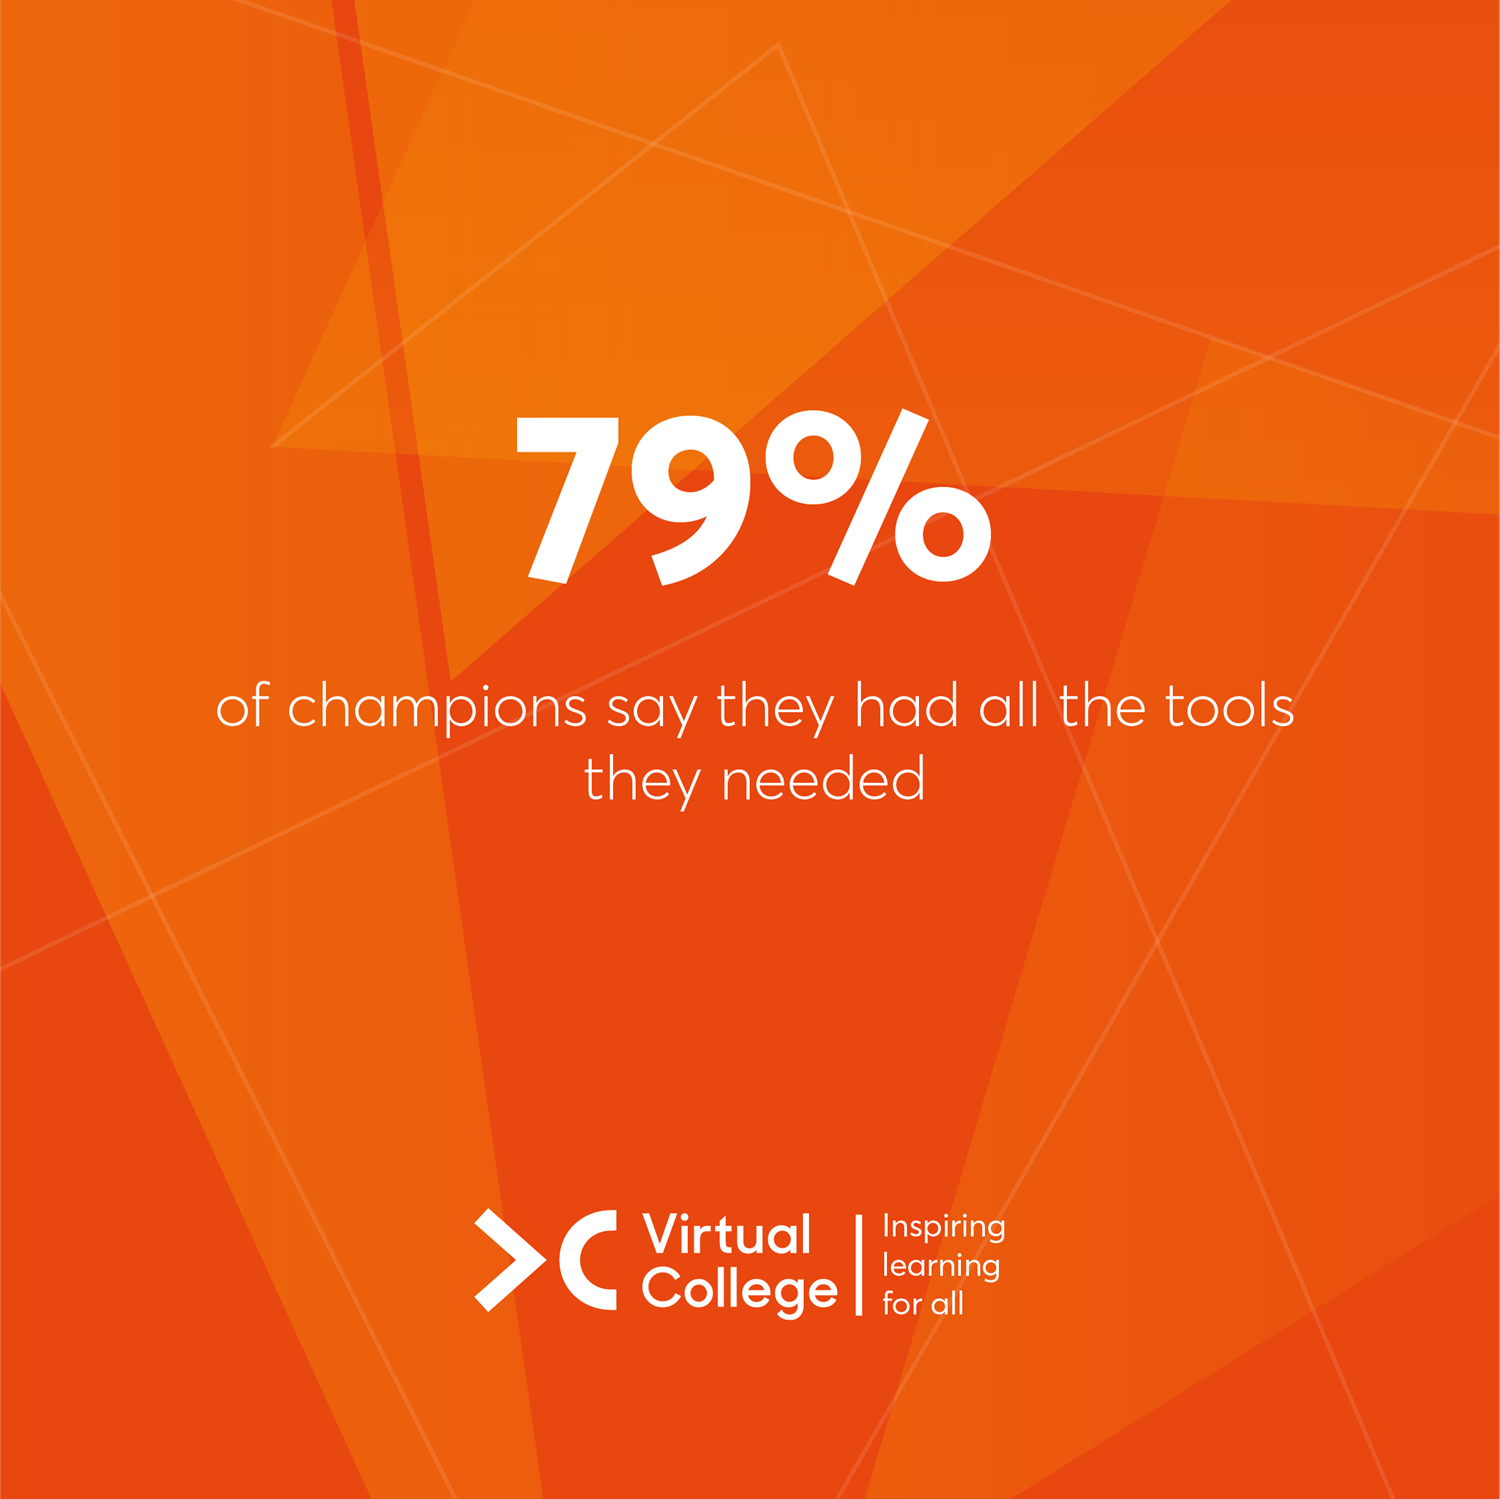 79% of champions say they had all the tools they needed